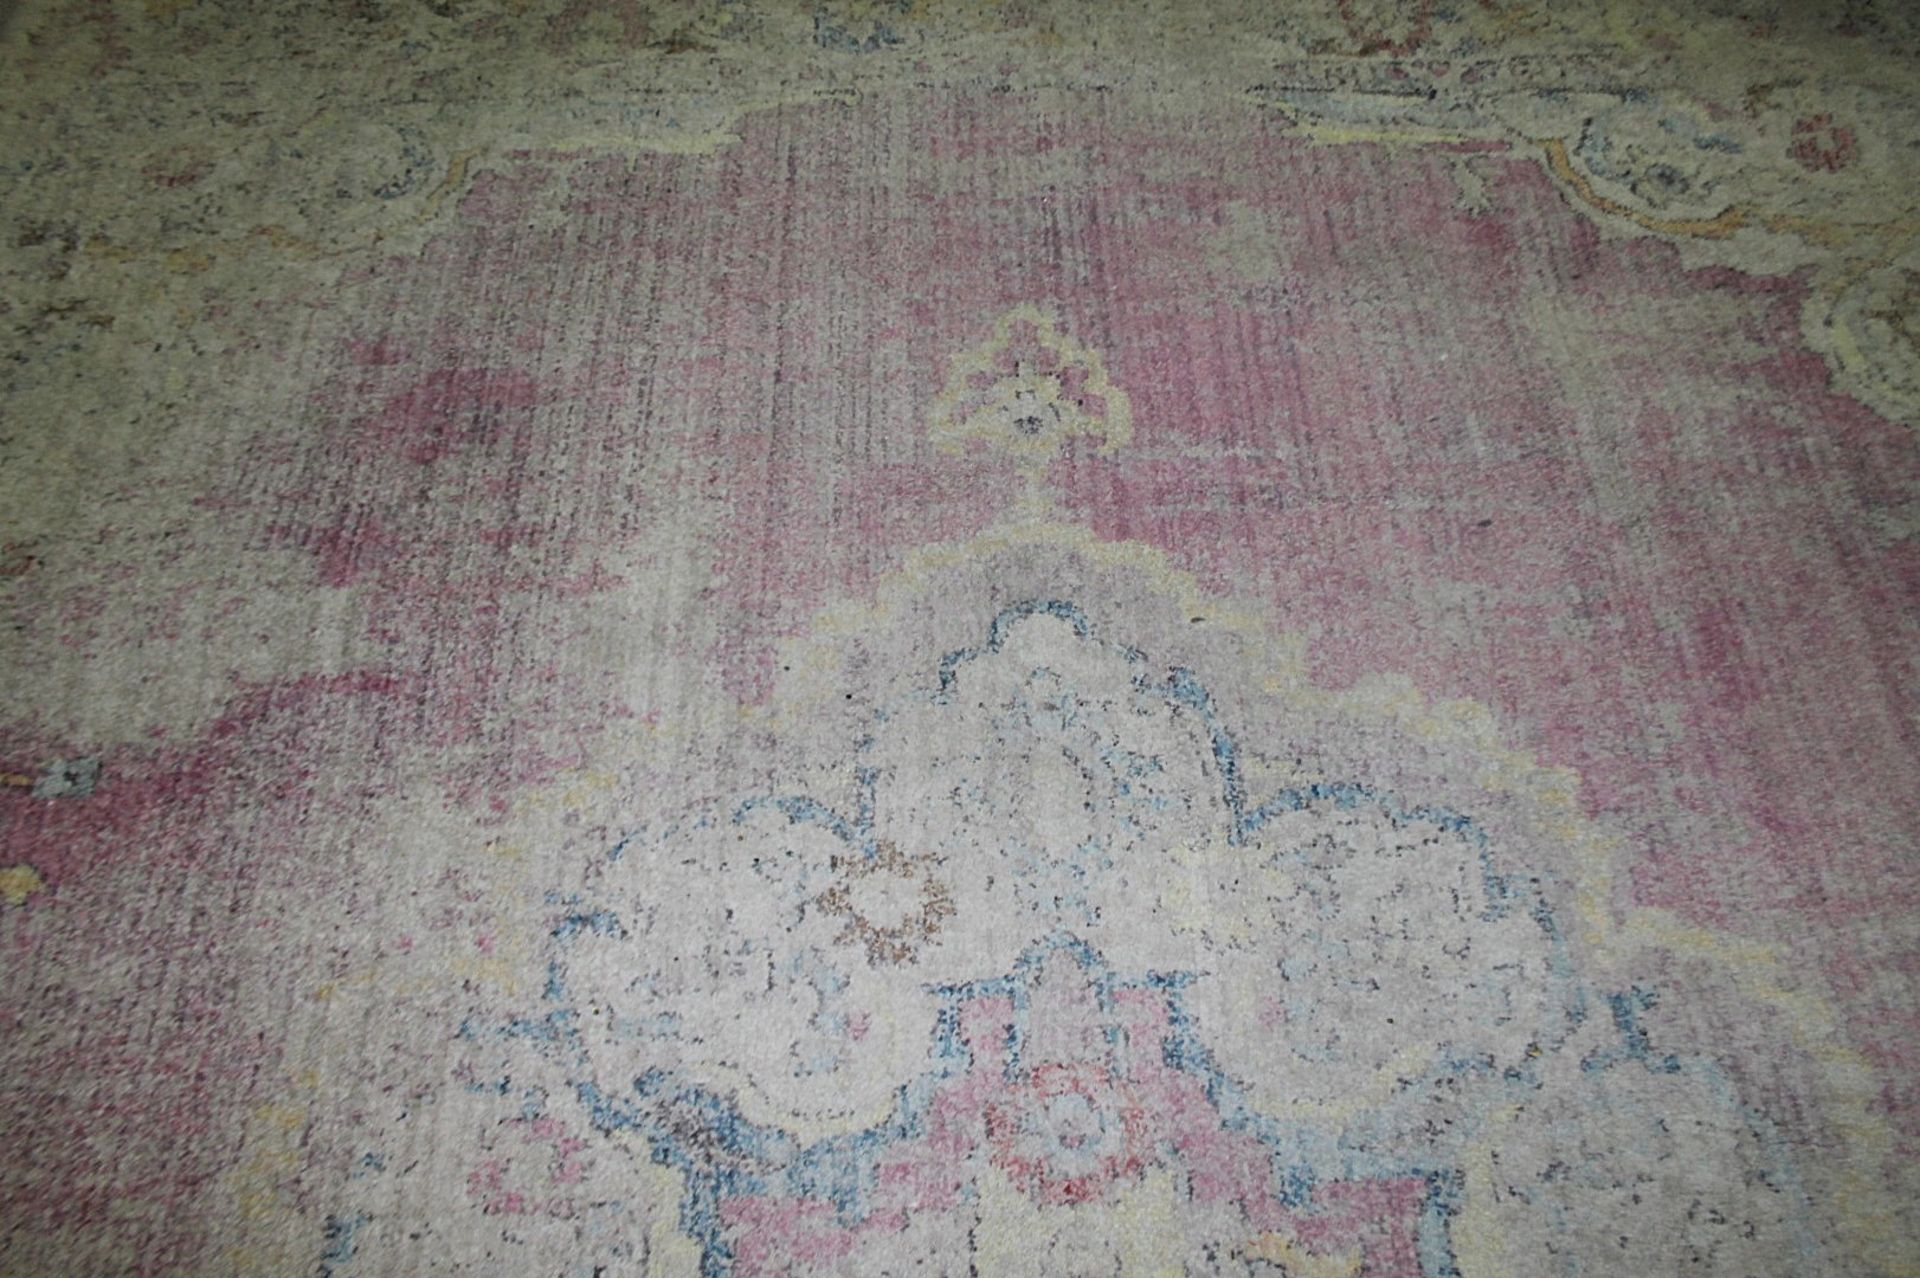 1 x Large Rug Featuring An Distressed Classical-Style Design In Pink - Ex-Showroom Piece - - Image 3 of 3